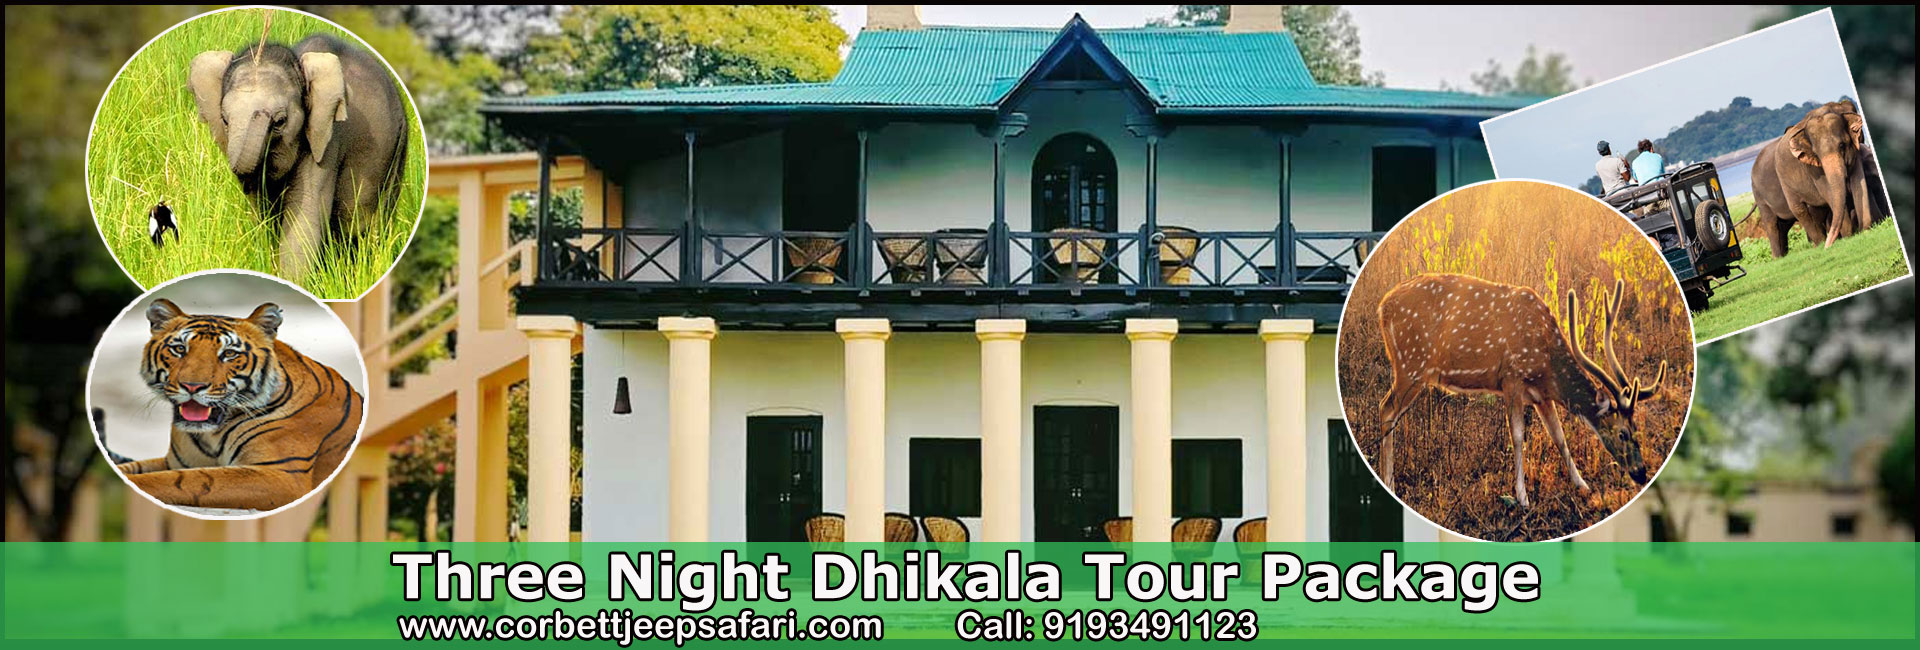 Two Night Dhikala Tour Package